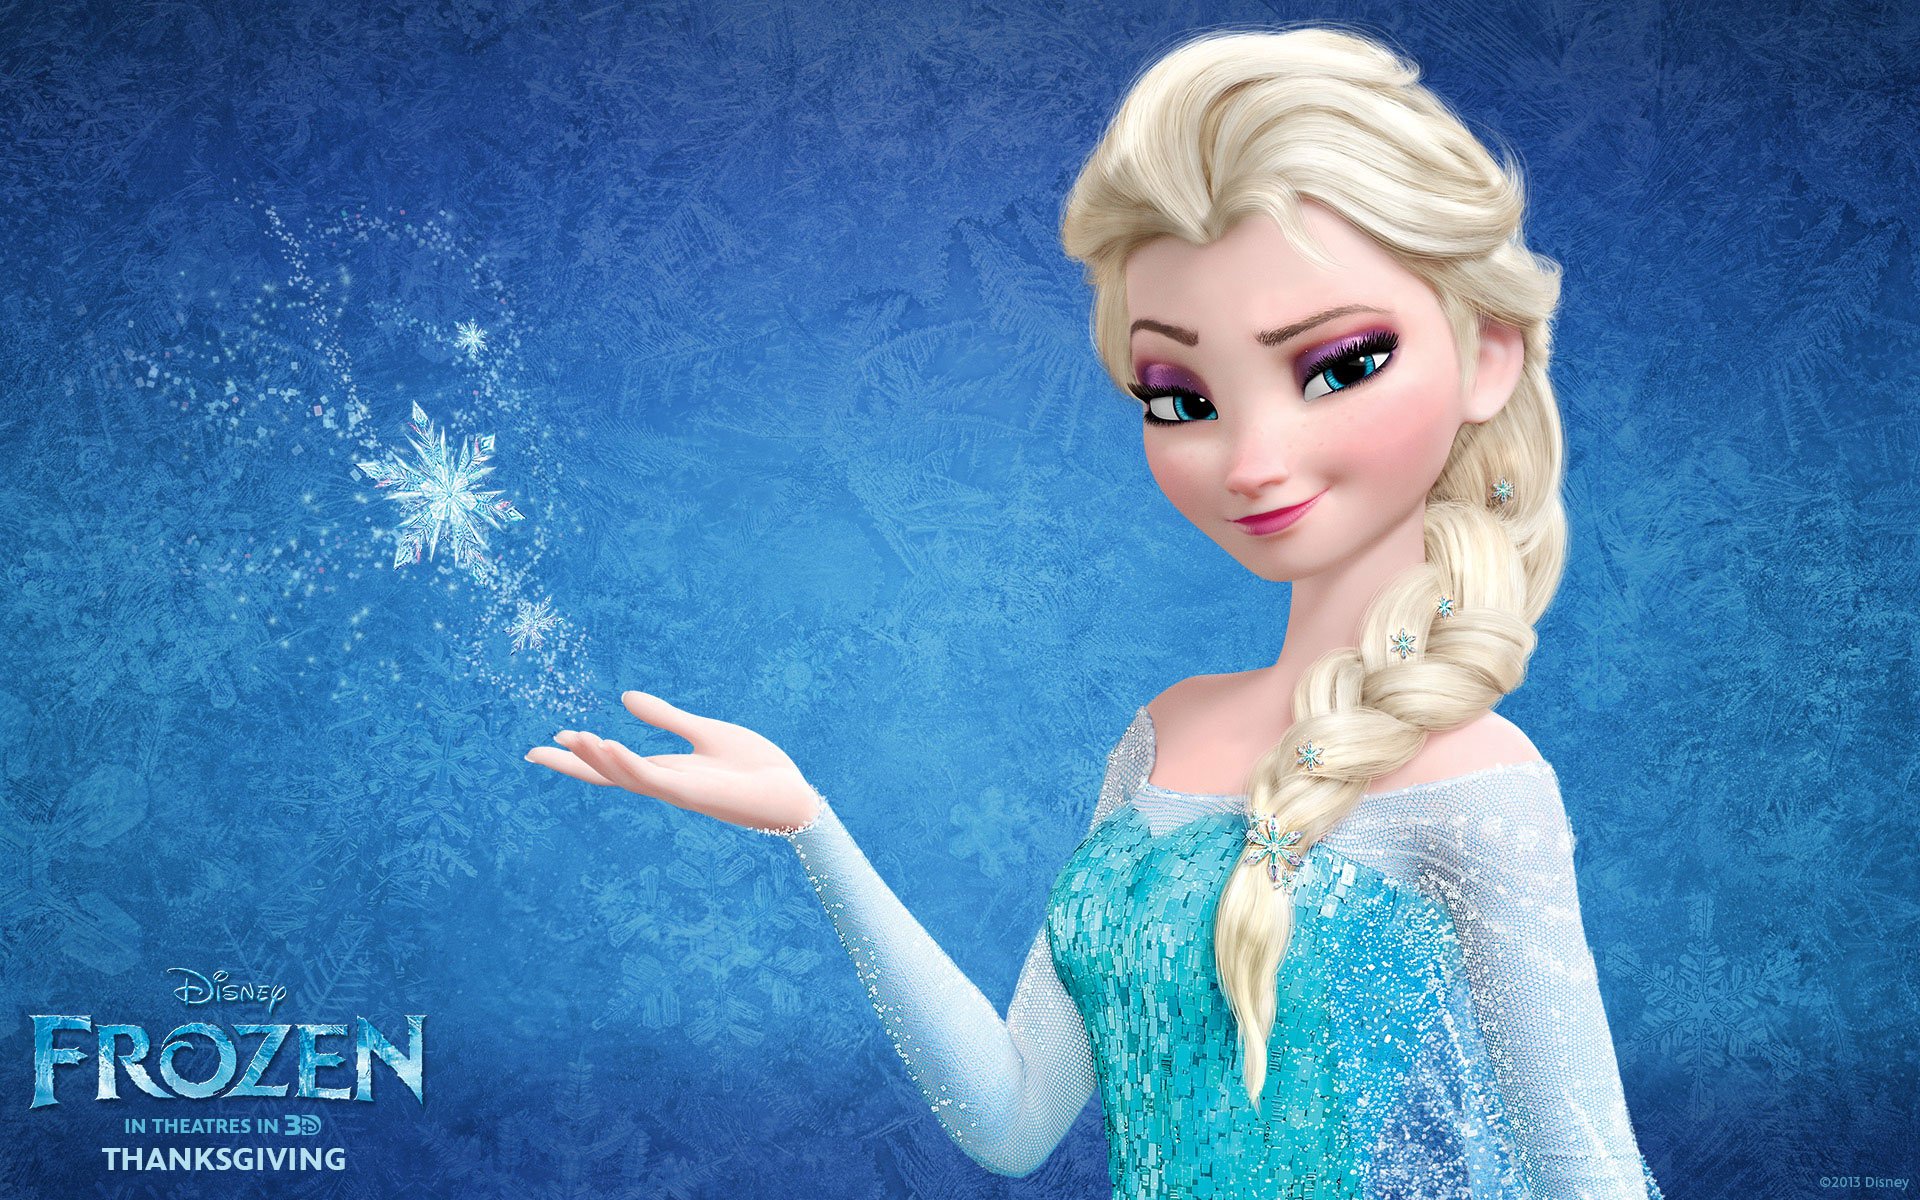 Frozen Movie Wallpapers[HD Timeline Covers